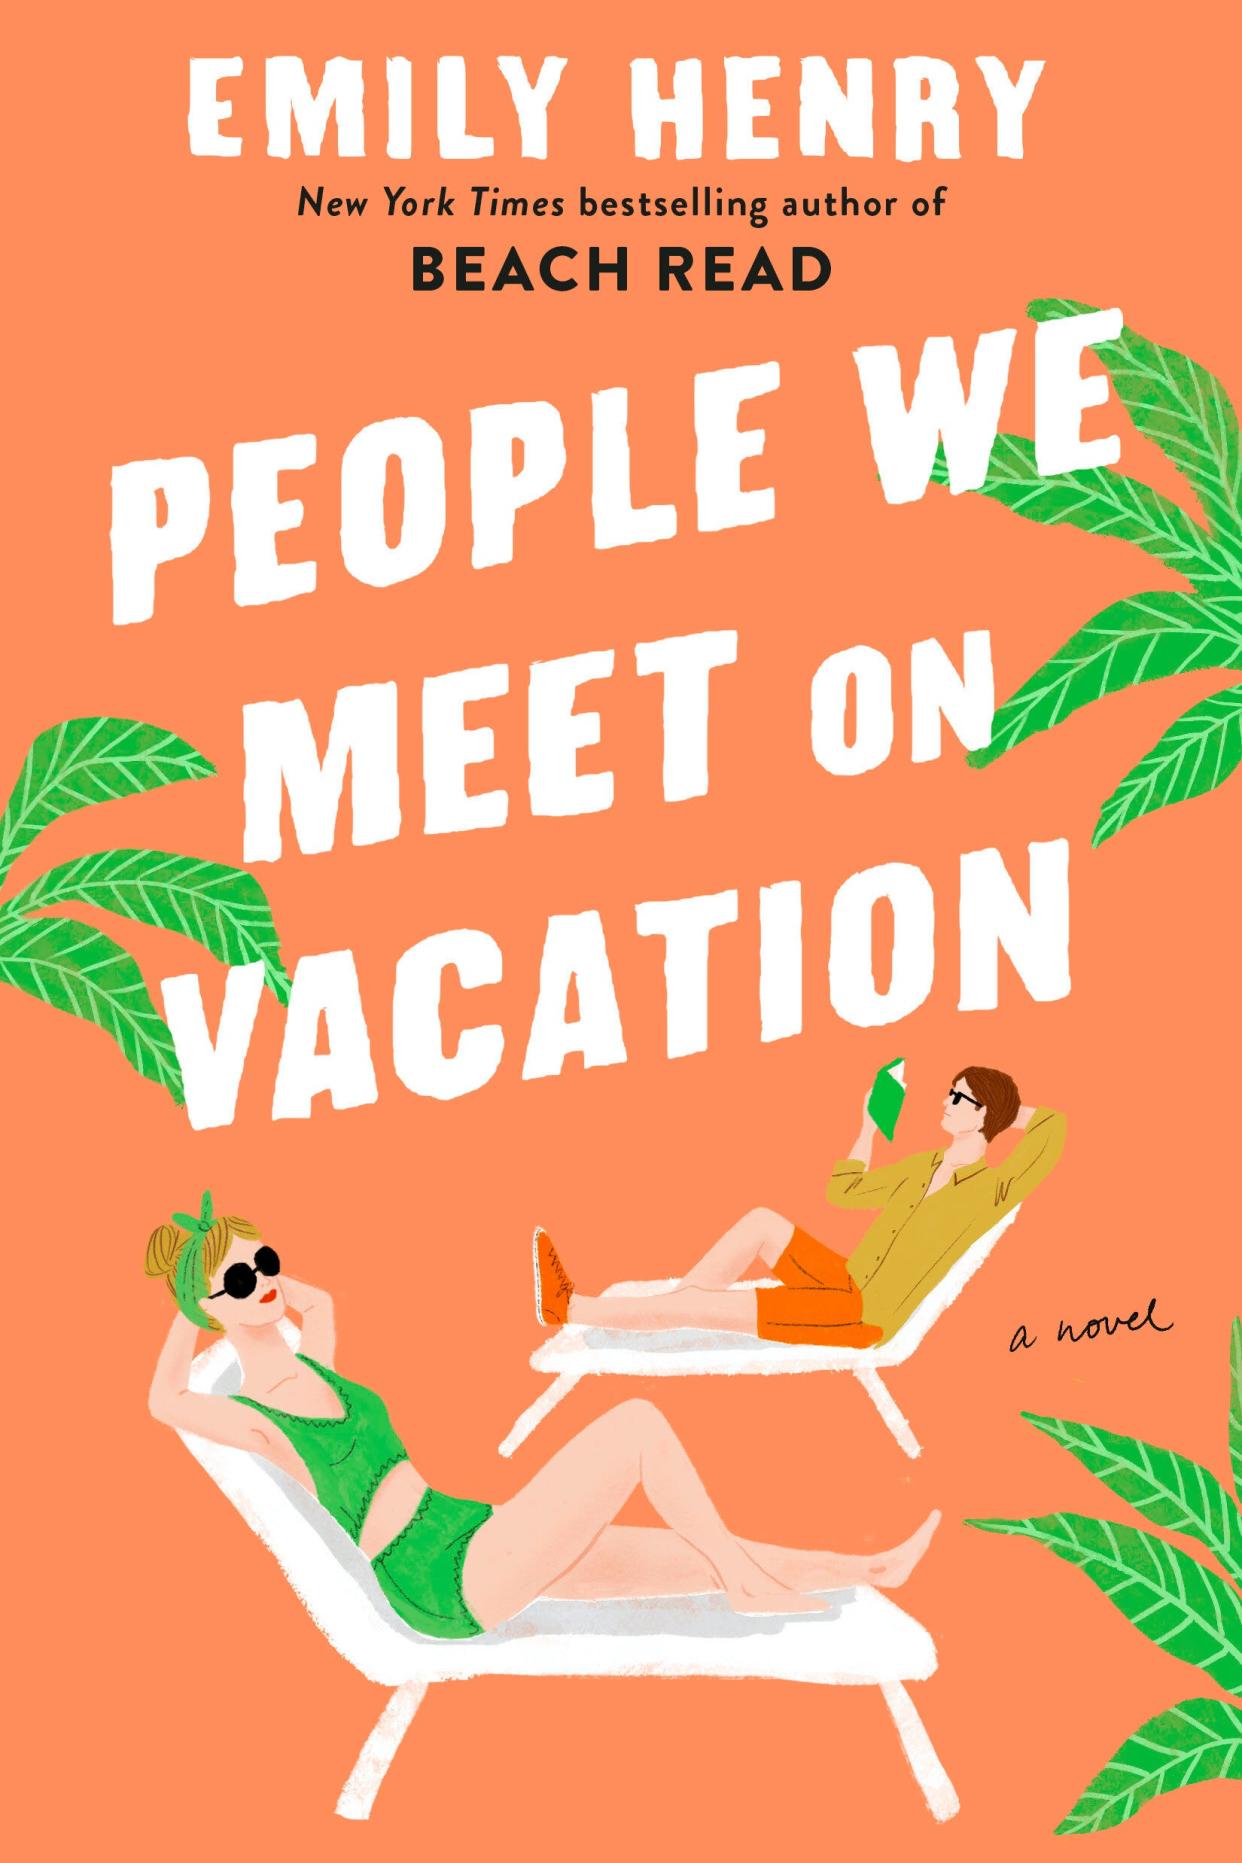 “People We Meet on Vacation” by Emily Henry.